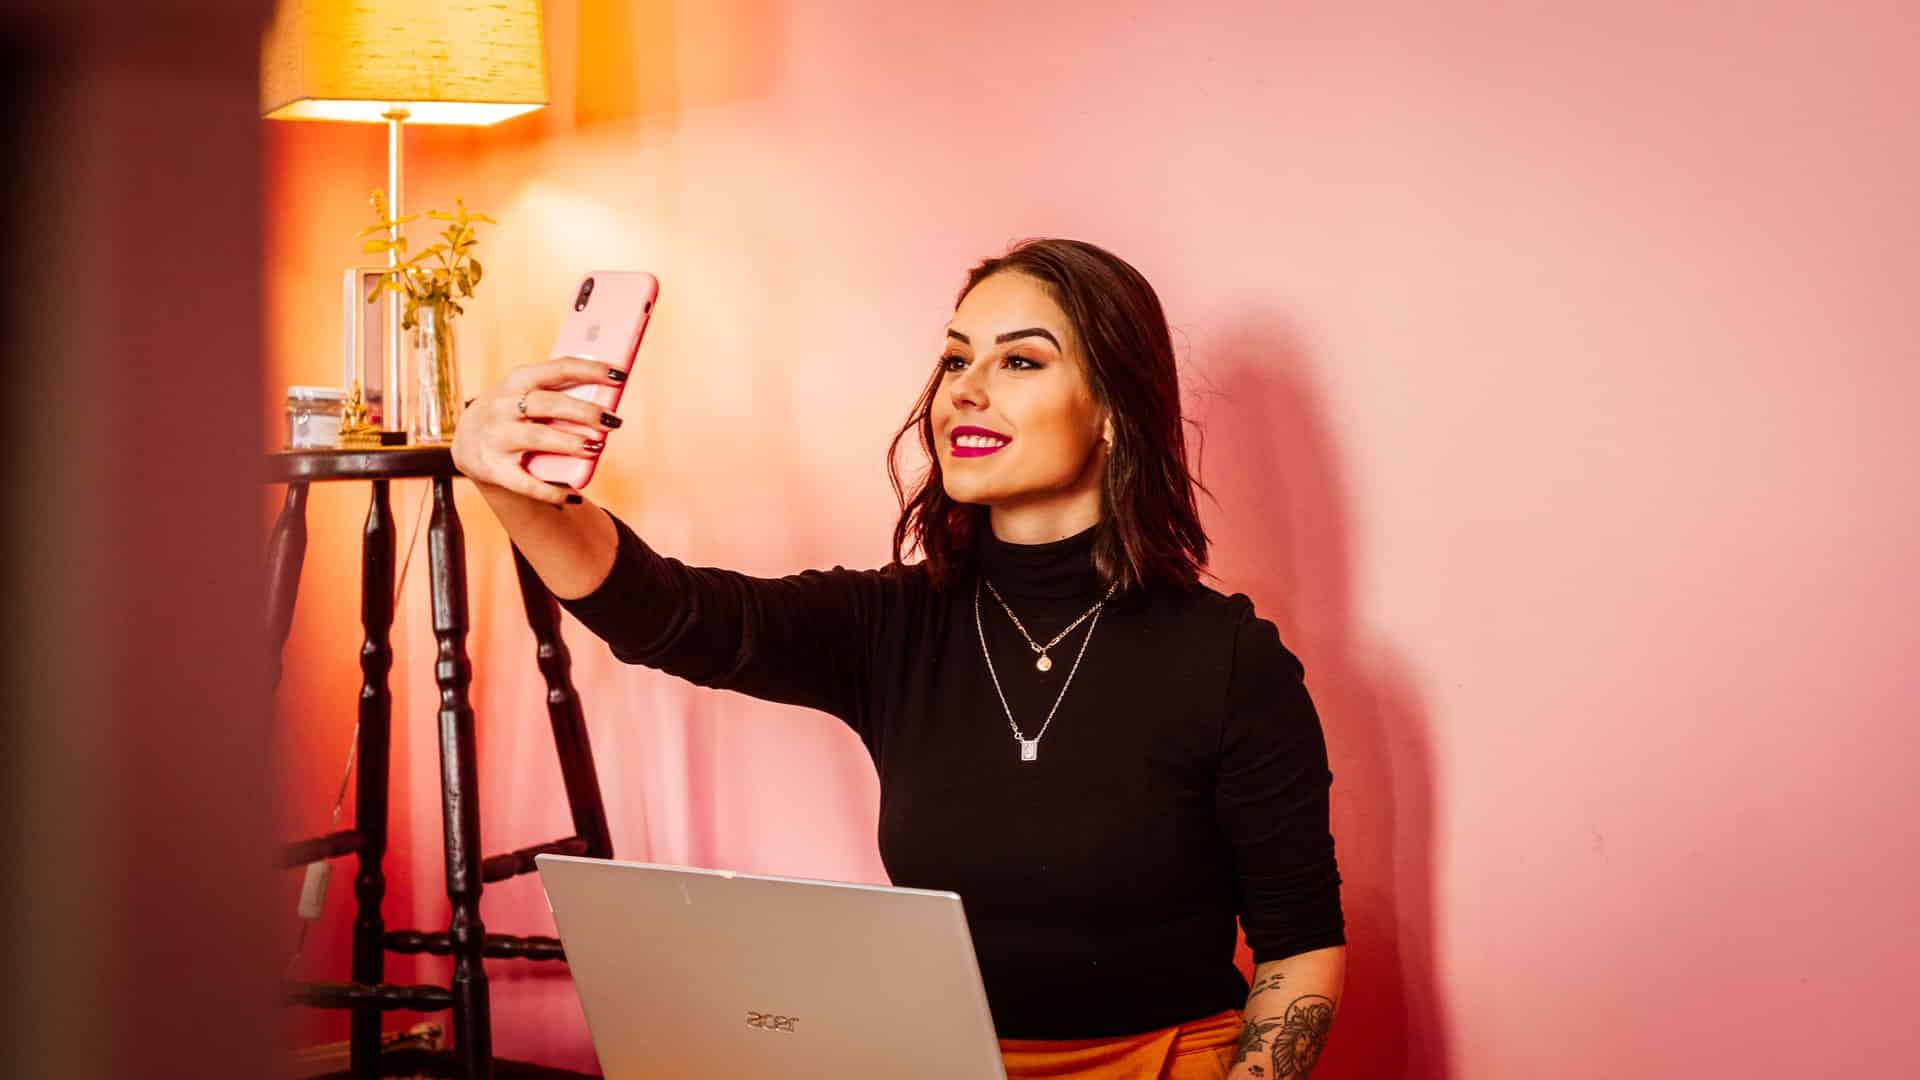 Image shows a woman taking a selfie on her phone, illustrating the concept of influencer marketing.